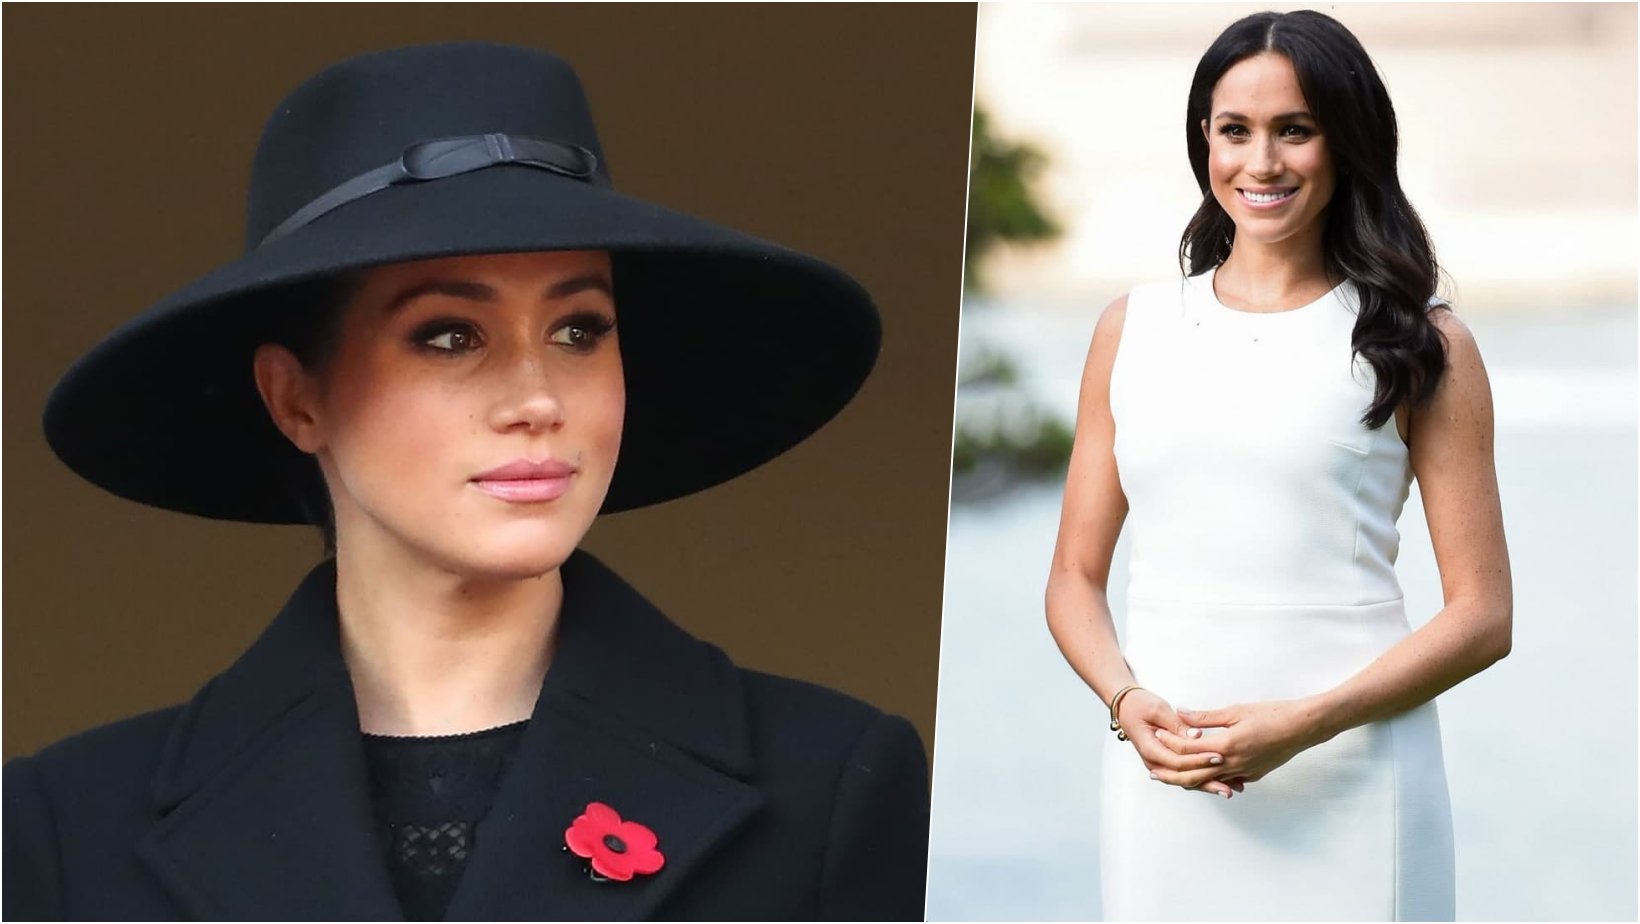 6 facebook cover.jpg?resize=412,232 - Meghan Markle’s Lawyer Shut Down Allegations That The Duchess “BULLIED” Staff Members Of The Palace